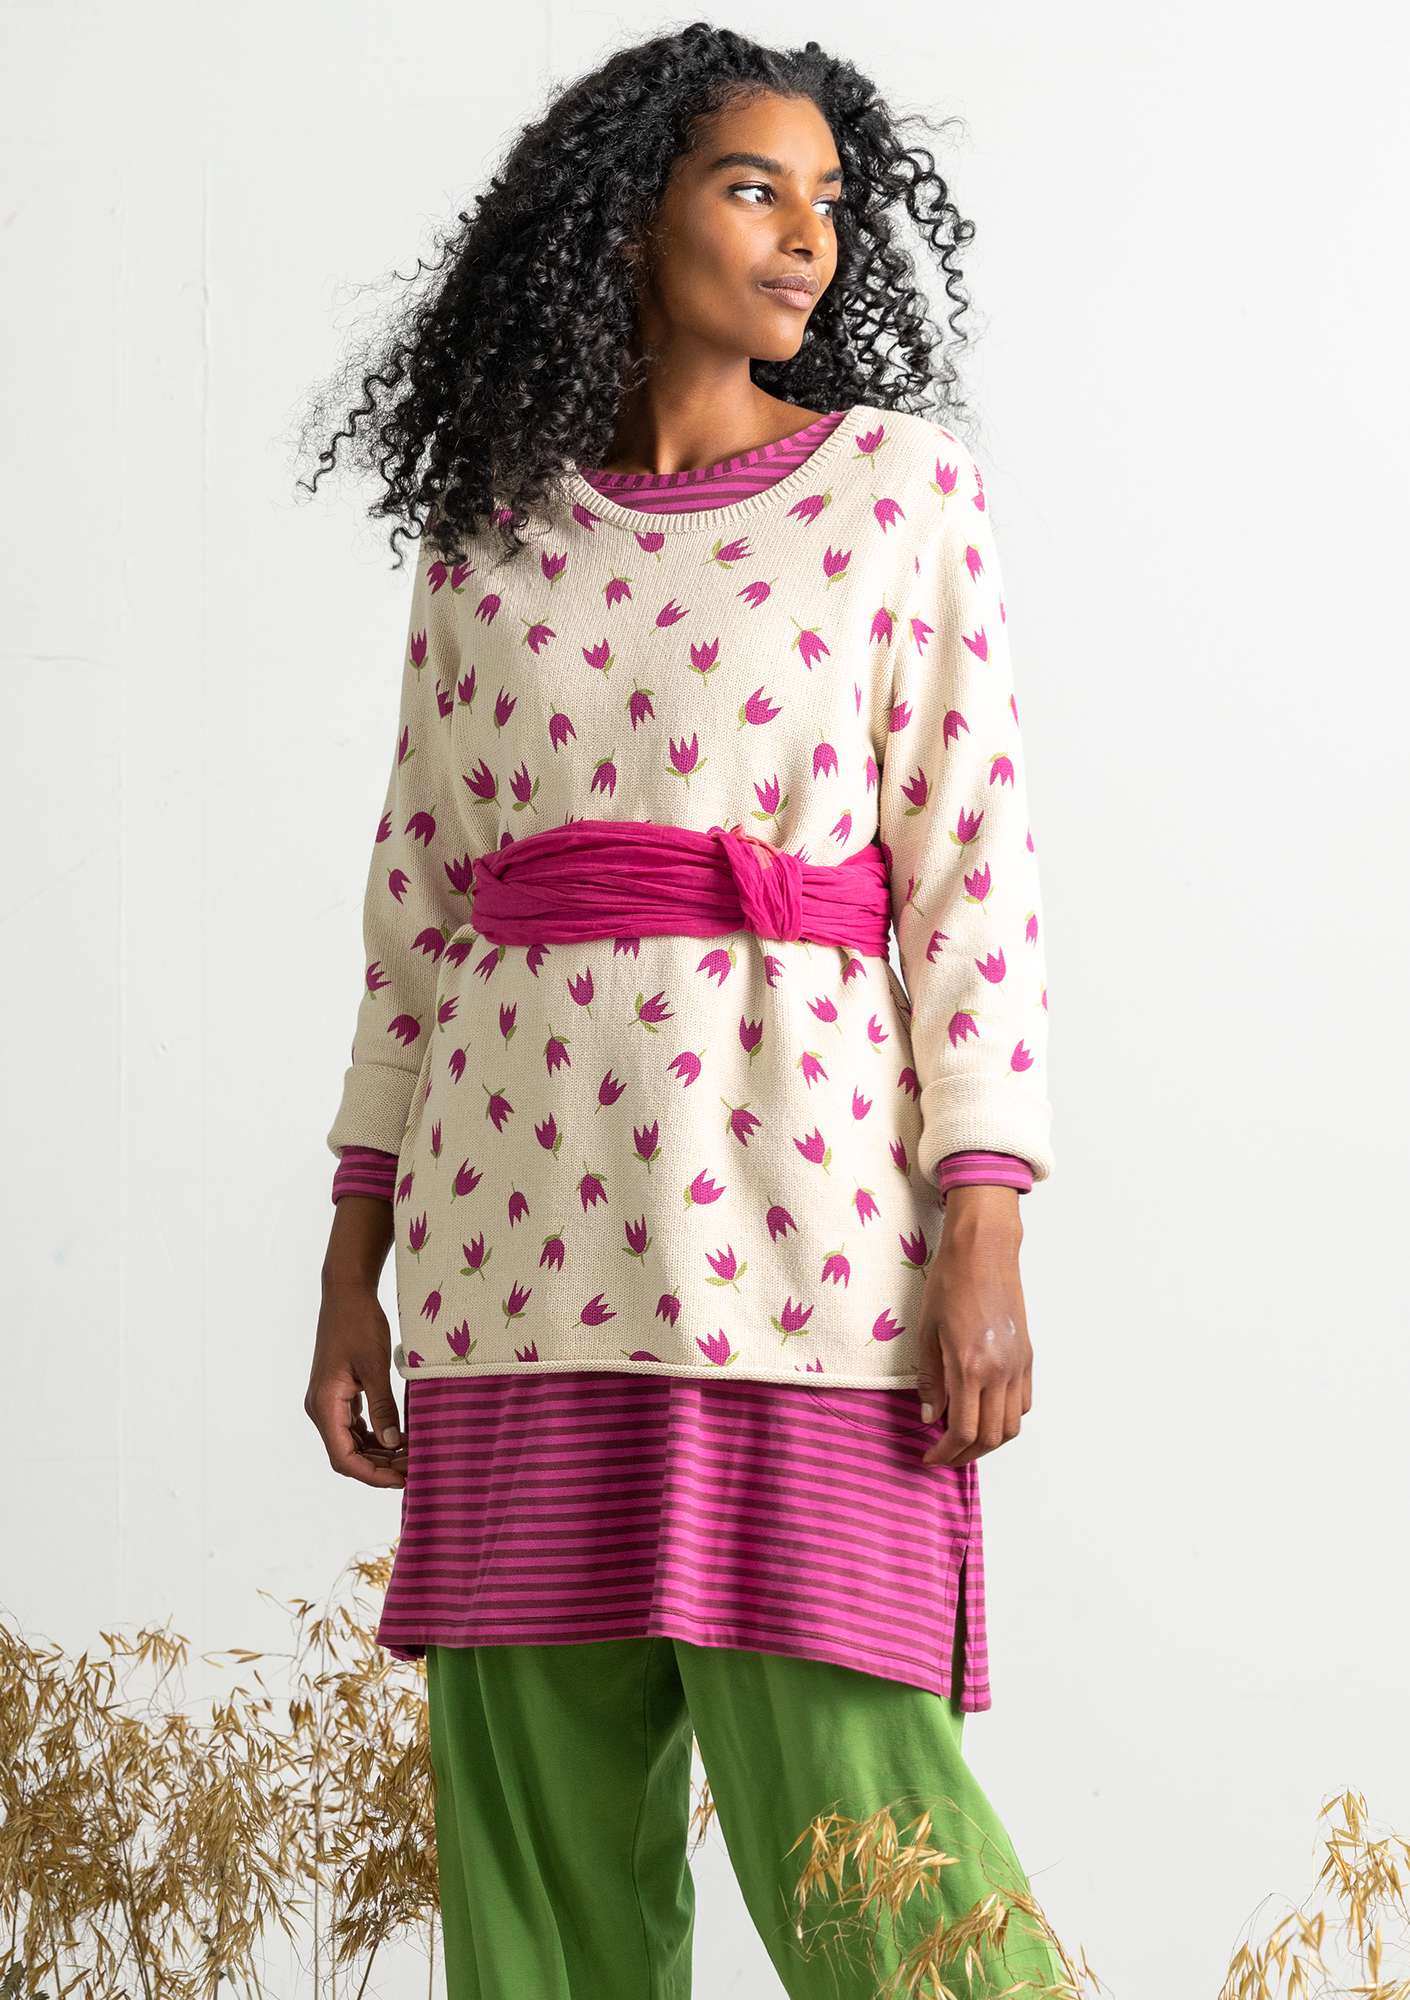 “Adena” BÄSTIS sweater in recycled cotton cerise/patterned thumbnail